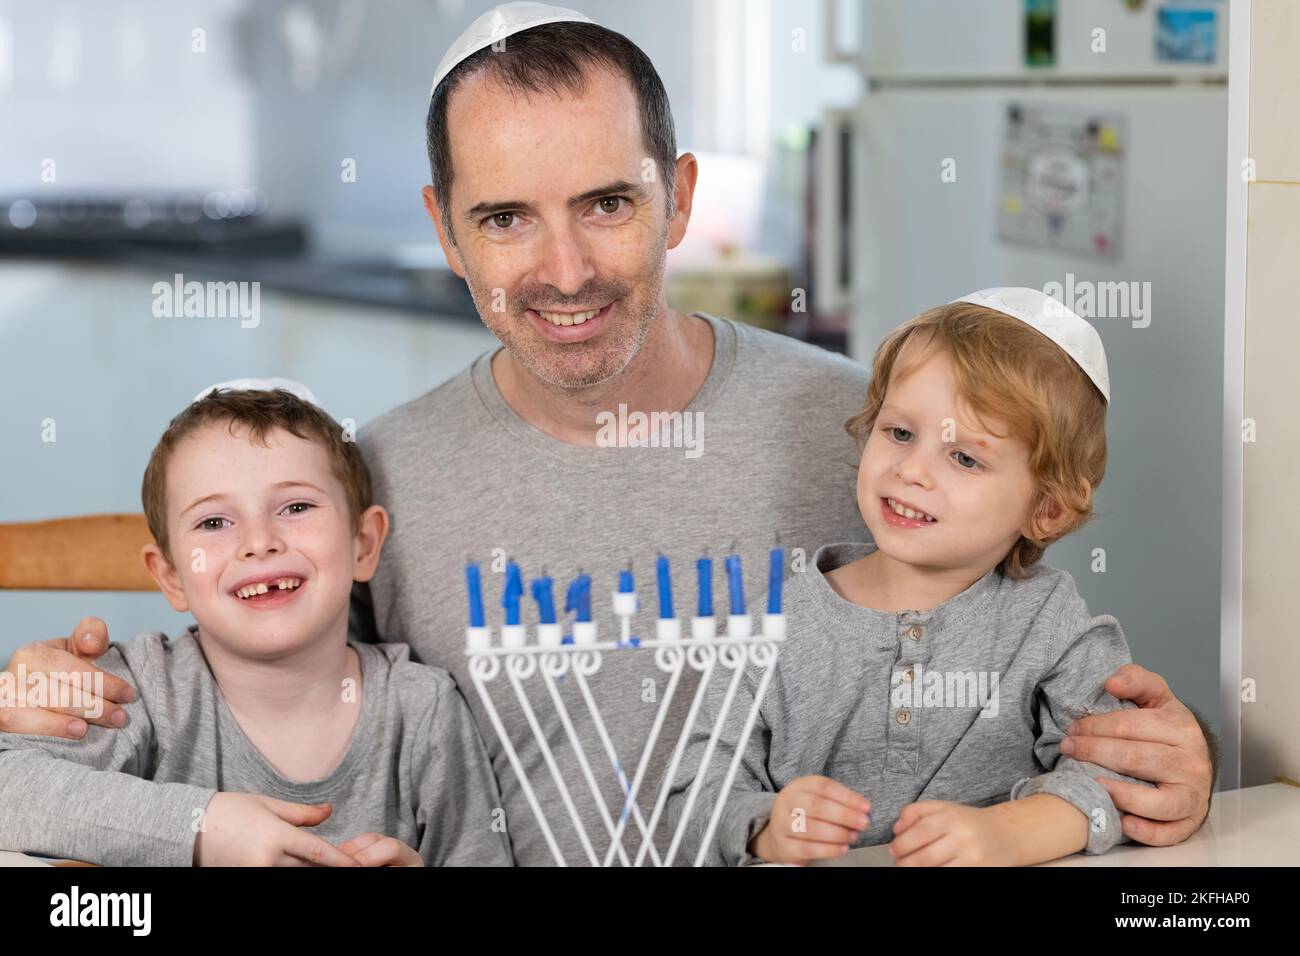 Father and sons with menorah celebrate hanukkah - Jewish religious holiday Stock Photo